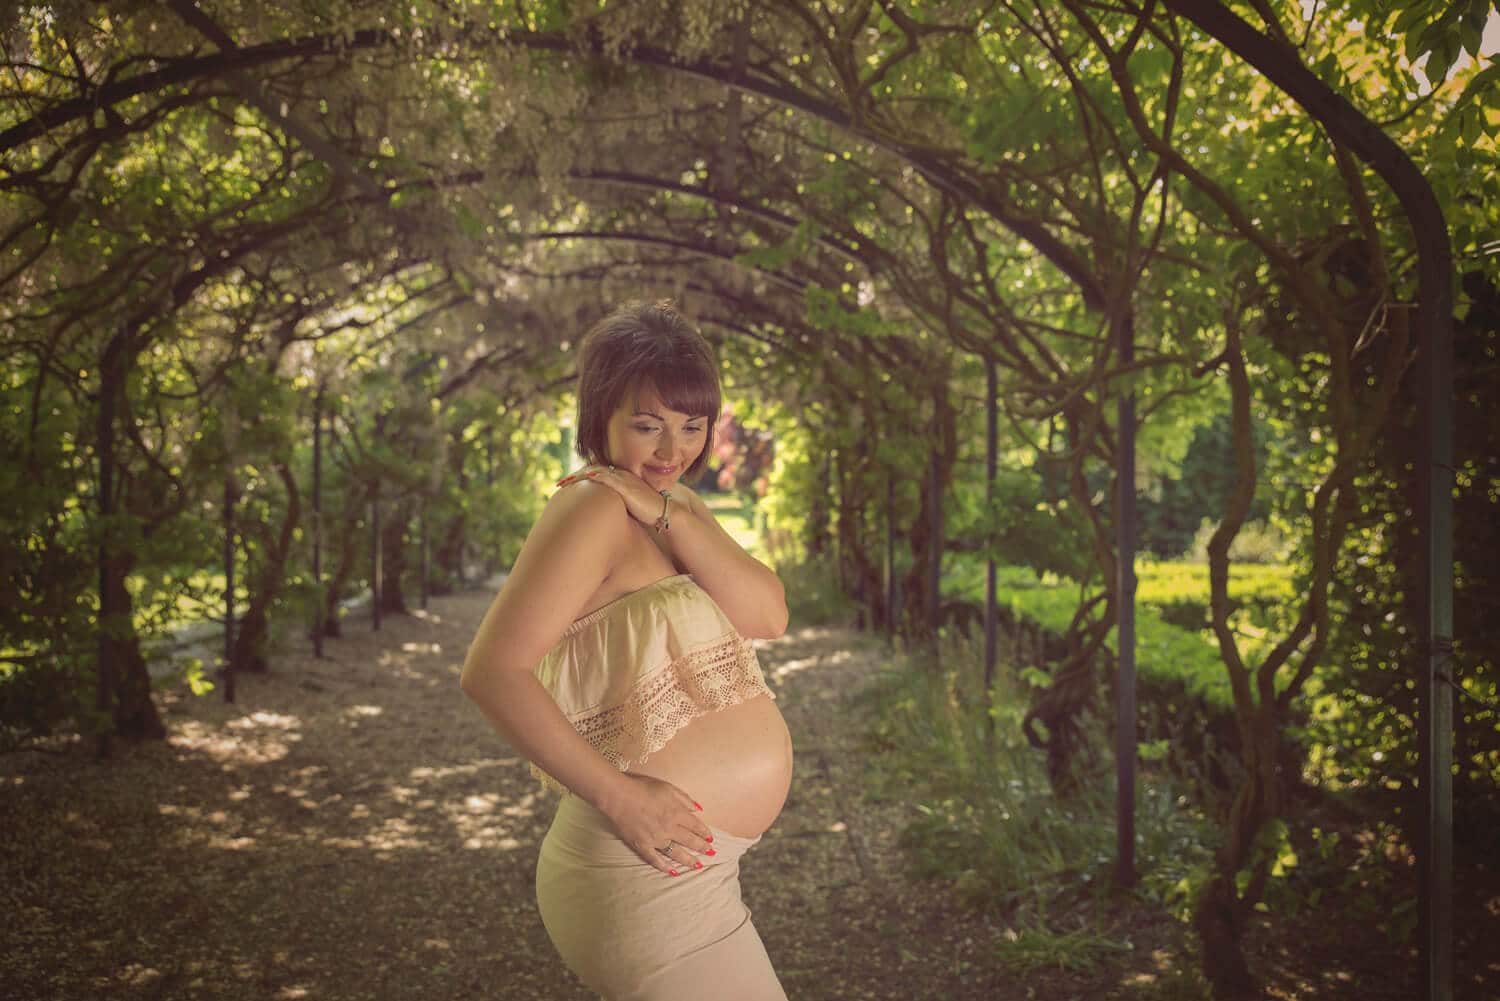 Outdoor maternity photo session photographed by Maternity Photographer Manchester